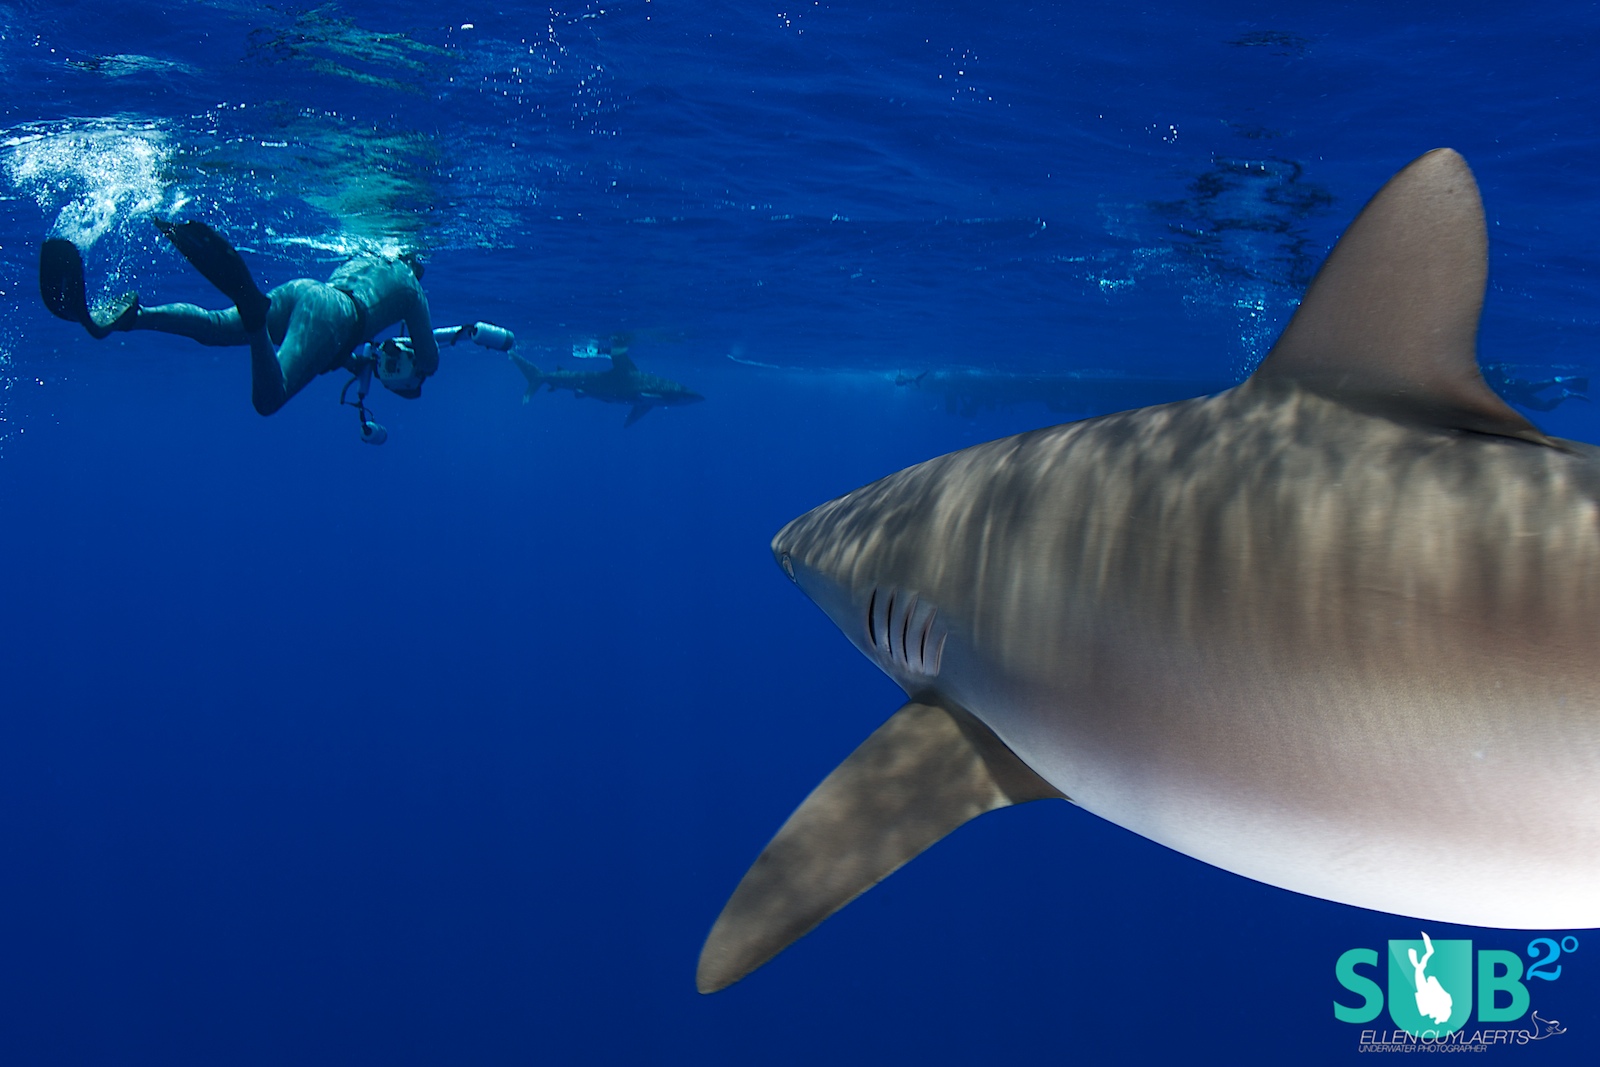 While concentrated on a shark in front of you, don't forget there are probably others around. To be aware of them at all times will keep your heart rate down.